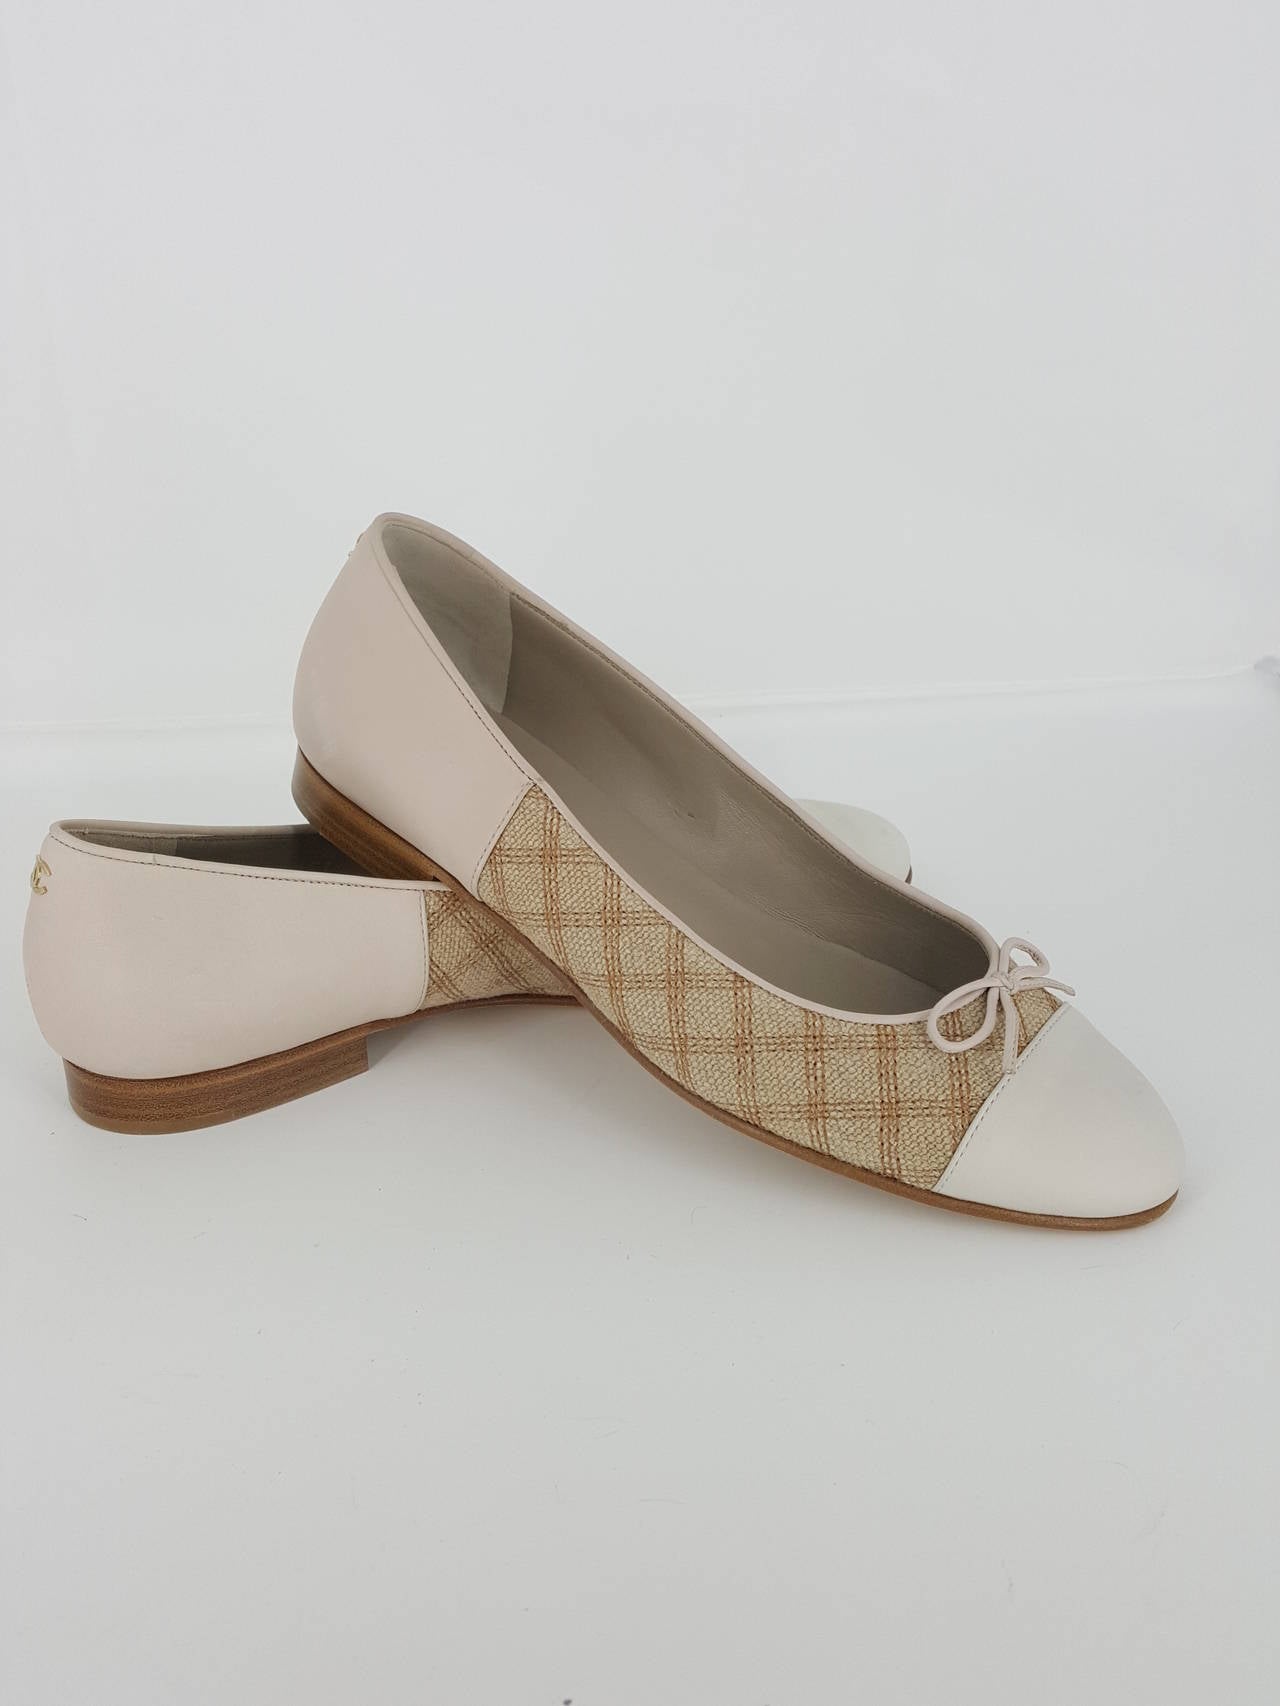 Offered for sale are these darling Bone and Beige CHANEL Ballet Flats is size 38 ( 7 1/2).  The Beige fabric sides have that definite CHANEL look.  on the heel is a tiny cc.  In almost new condition, these are a must for any wardrobe.
These will